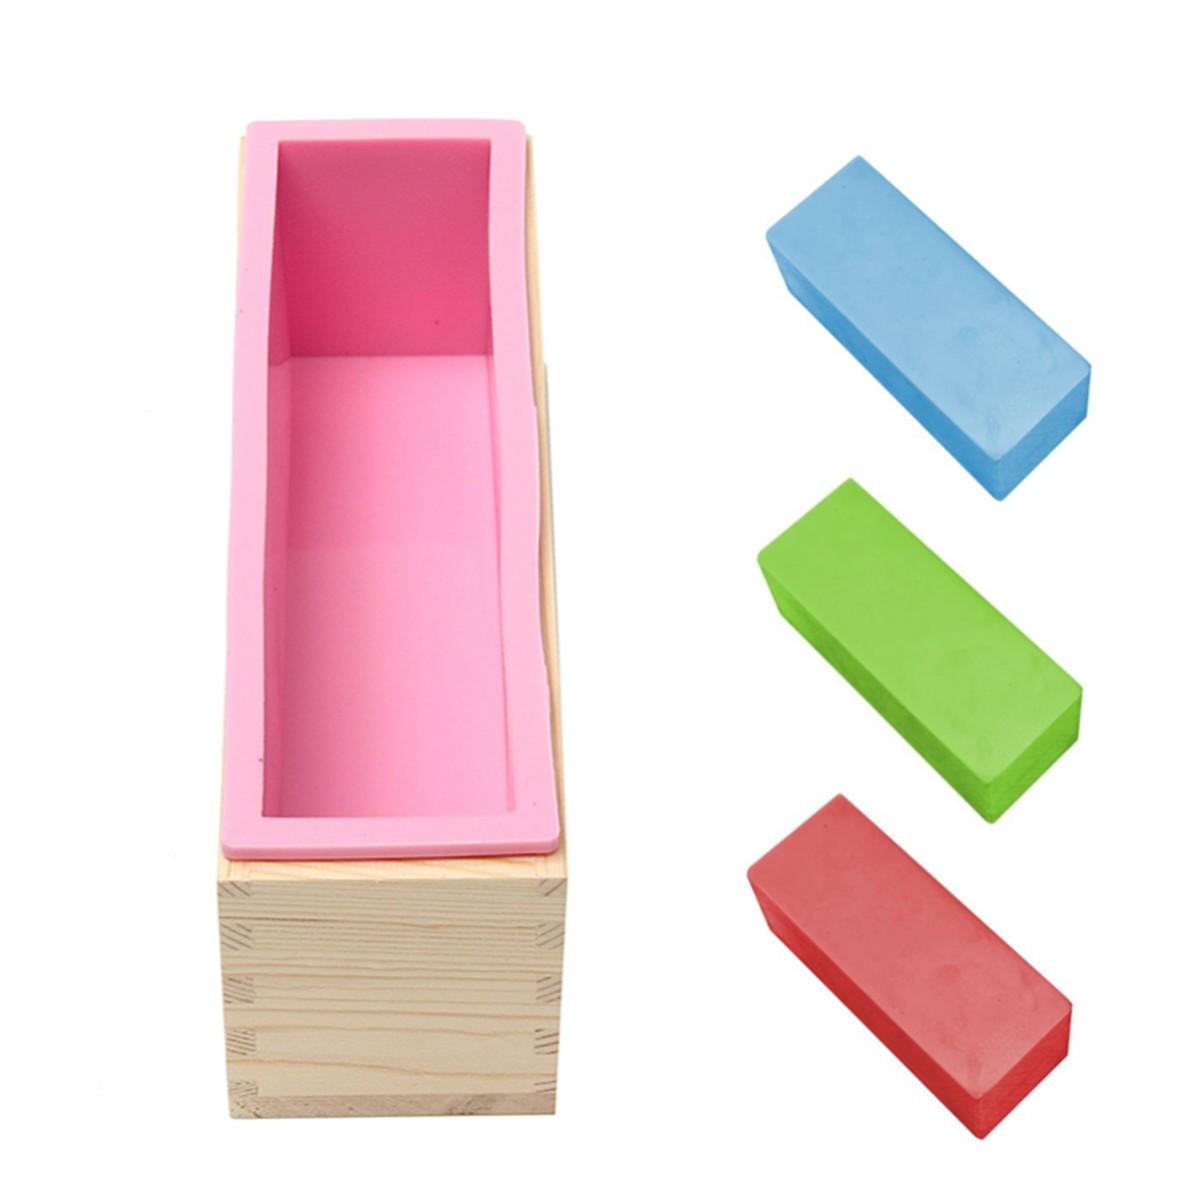 Silicone Loaf Bread Cake Mold Soap Making Mould Biscuit Baking Tool with Wooden Box